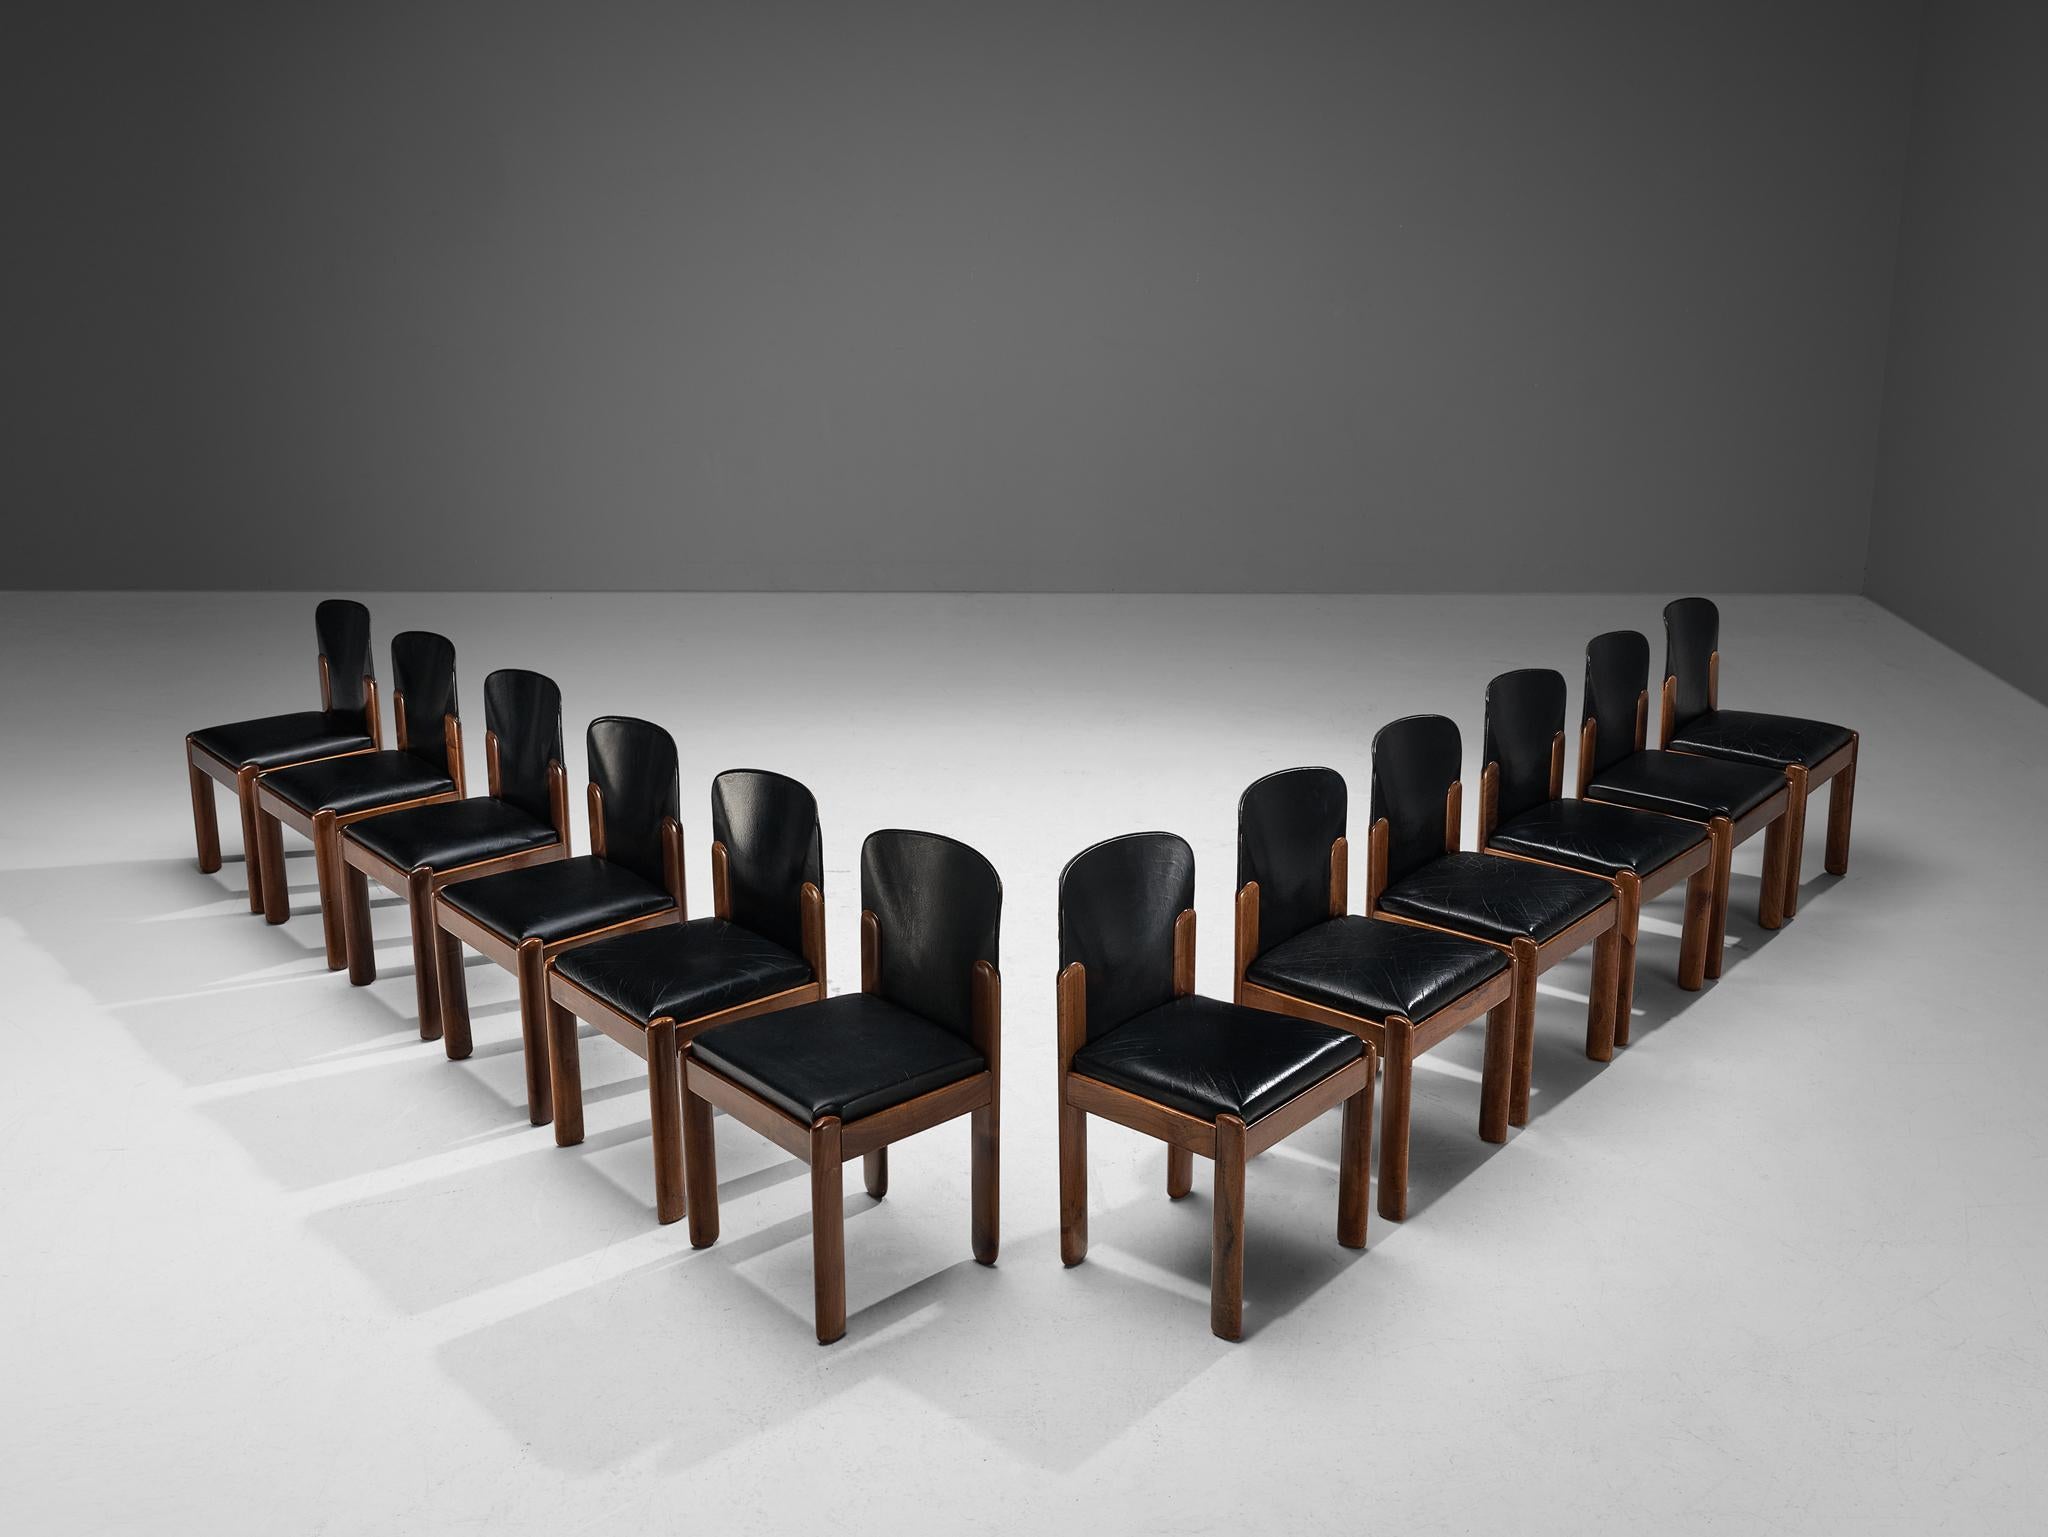 Silvio Coppola for Bernini, set of twelve dining chairs, model 330, leather, stained beech, Italy, 1960s

Wonderful set of ten dining chairs by Italian designer Silvio Coppola. These aesthetically well-balanced chairs strongly convince with the